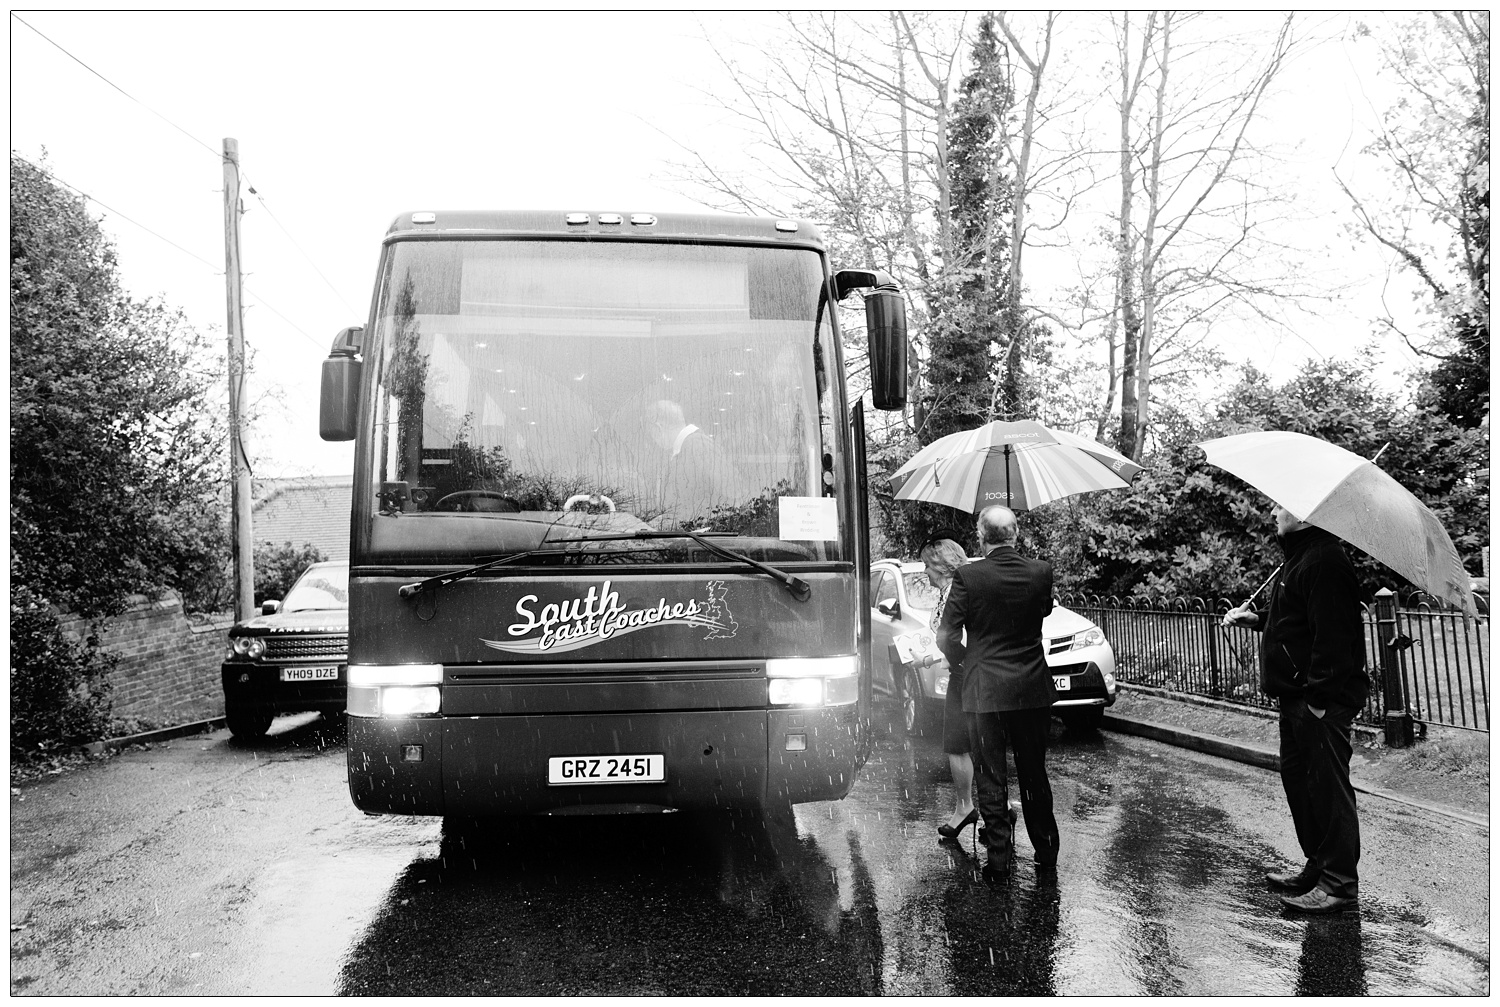 People queing up to board a coach in the rain in Purleigh.